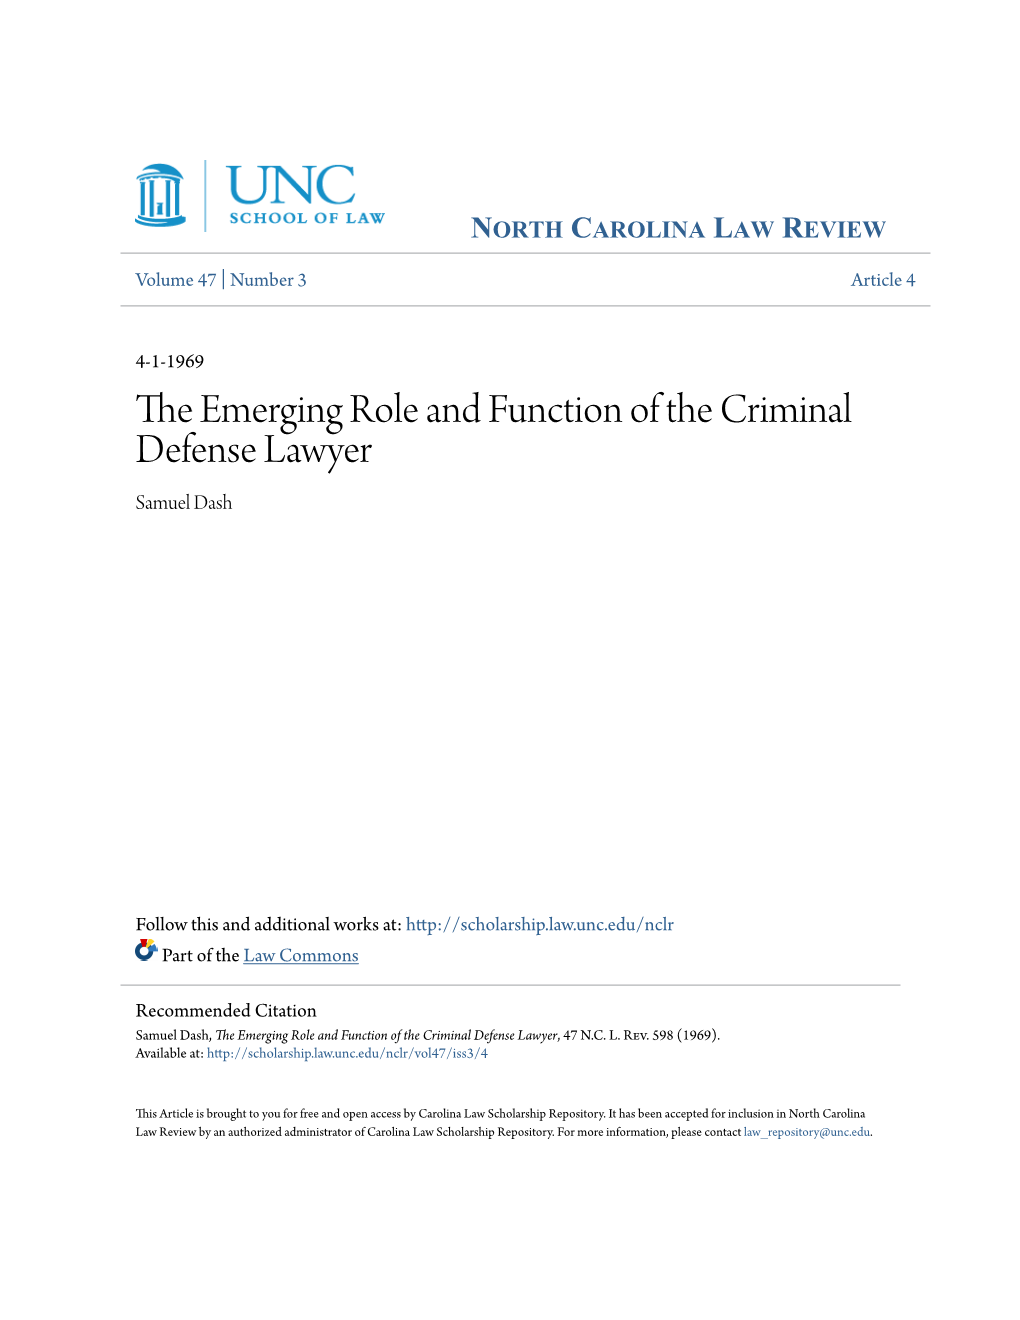 The Emerging Role and Function of the Criminal Defense Lawyer, 47 N.C